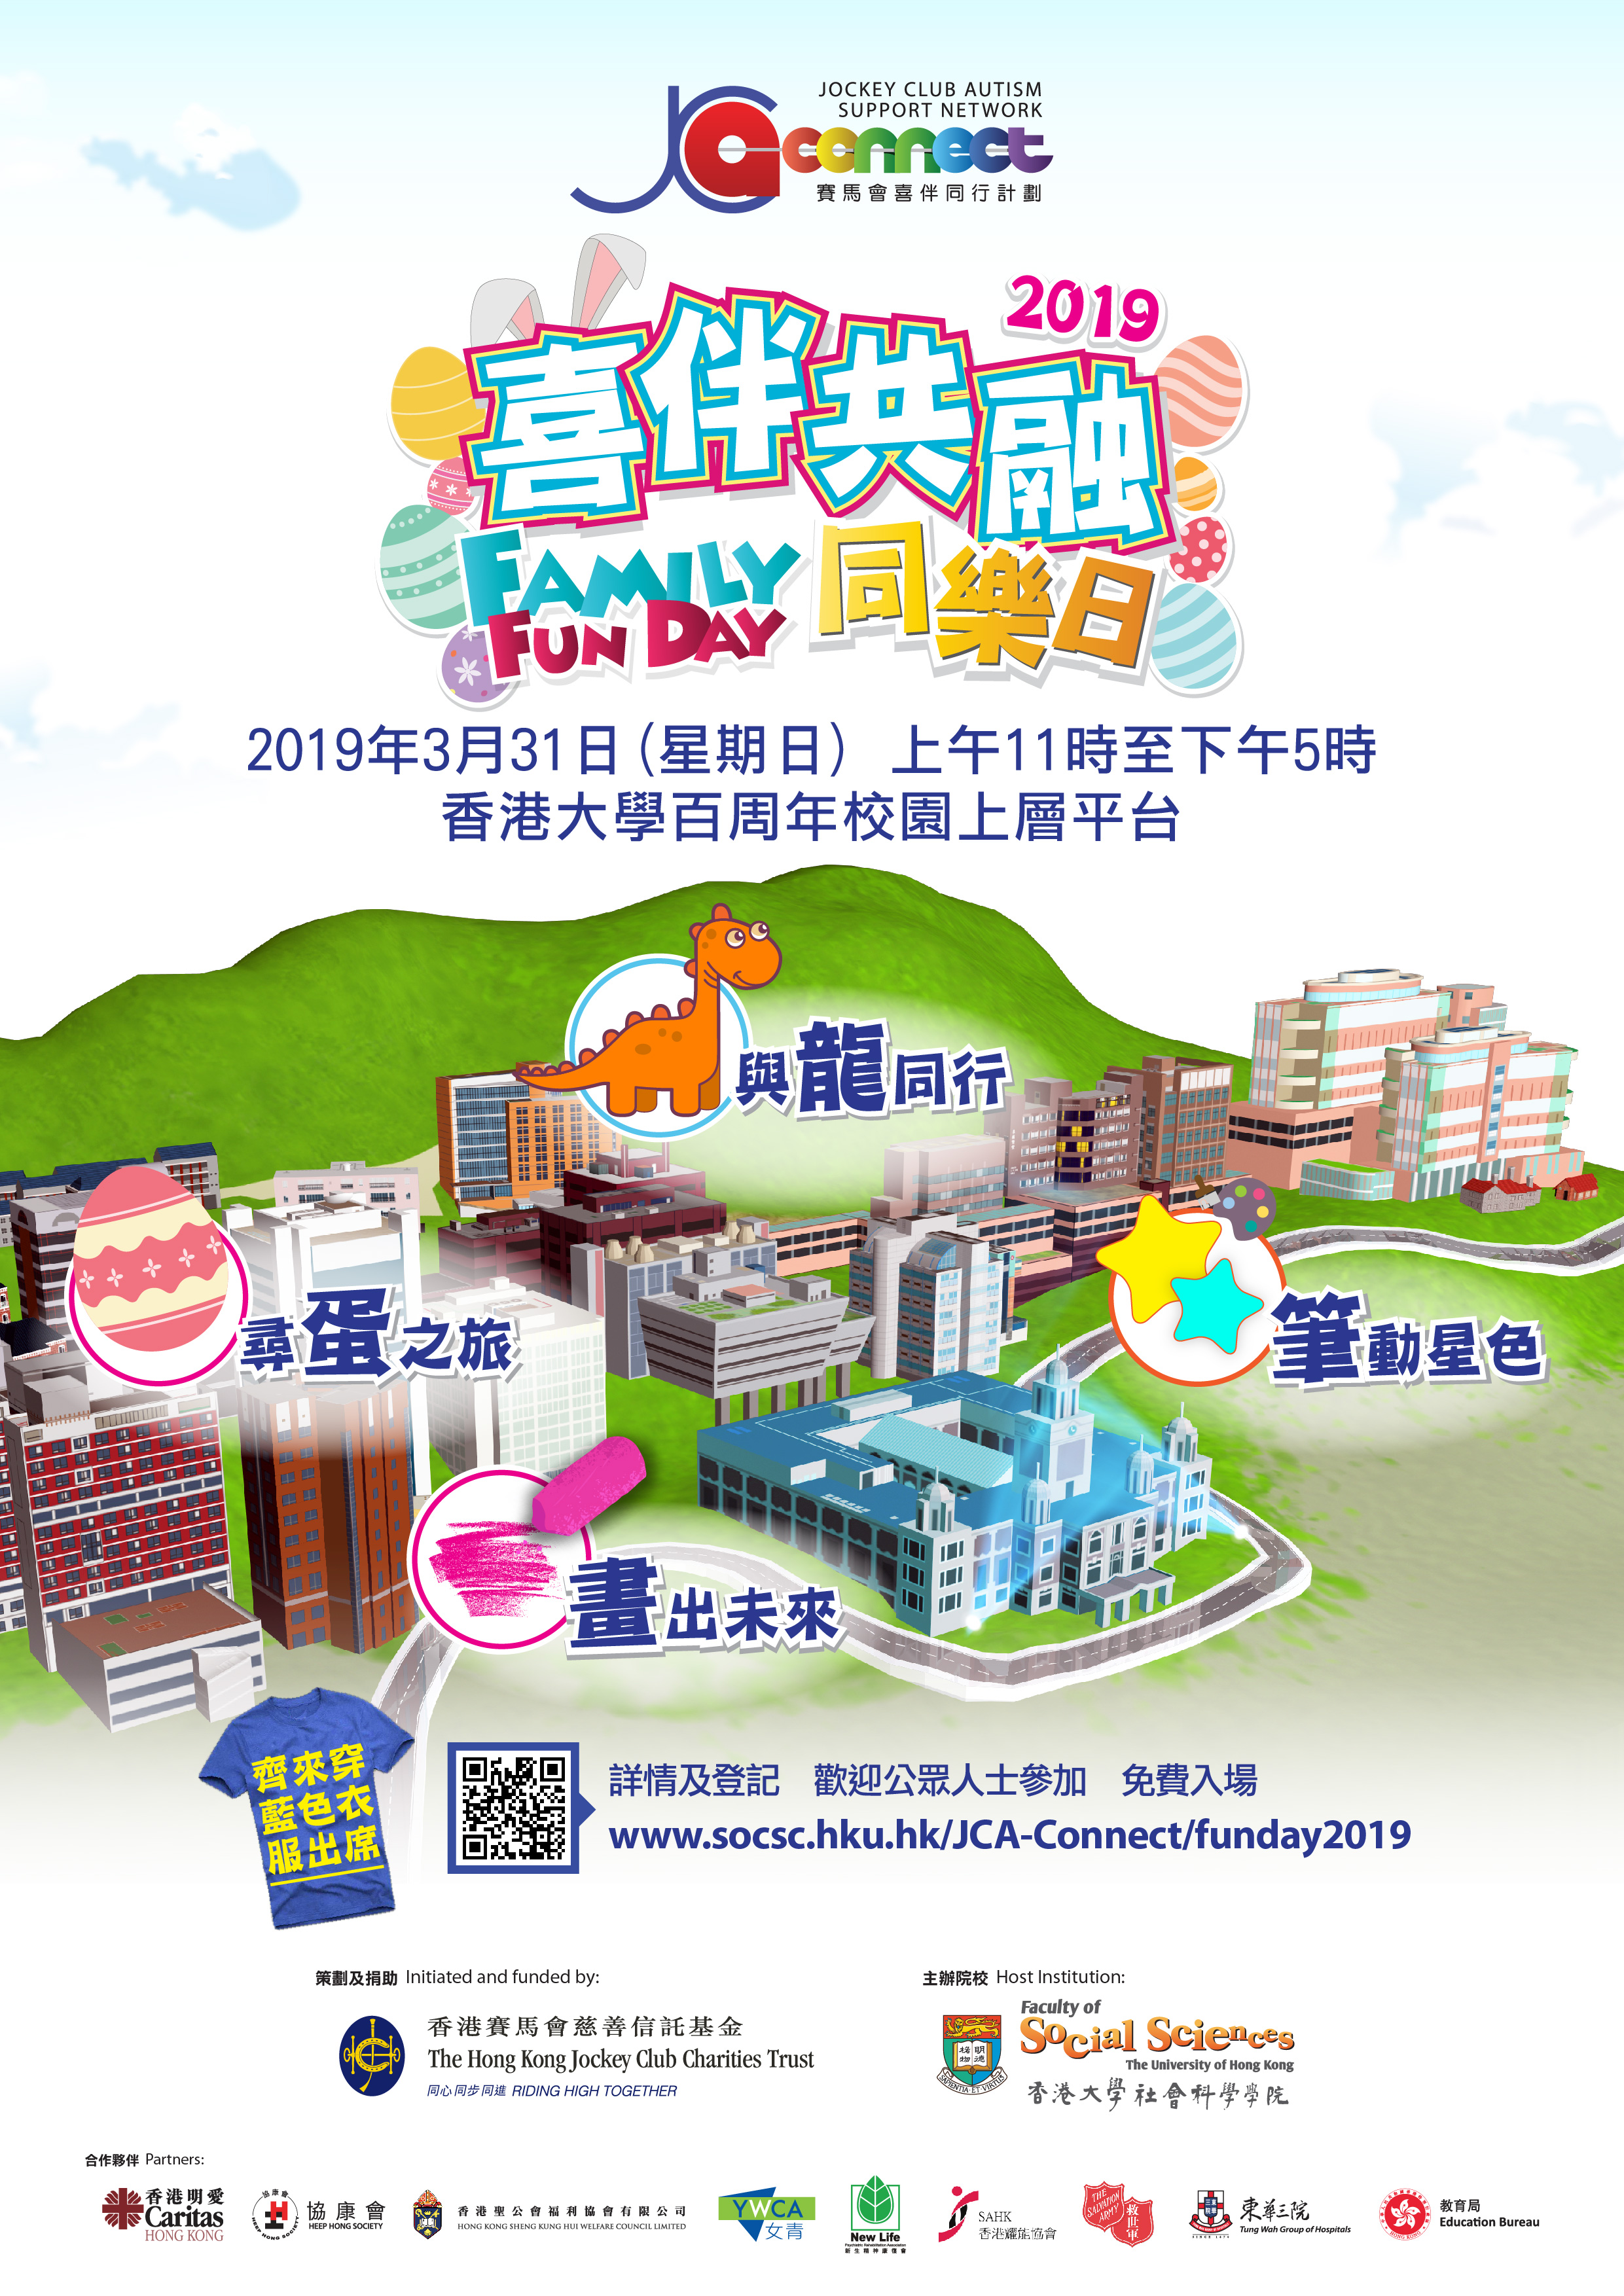 Official poster of the event, featuring cartoon drawings of the buildings on the campus of the University of Hong Kong